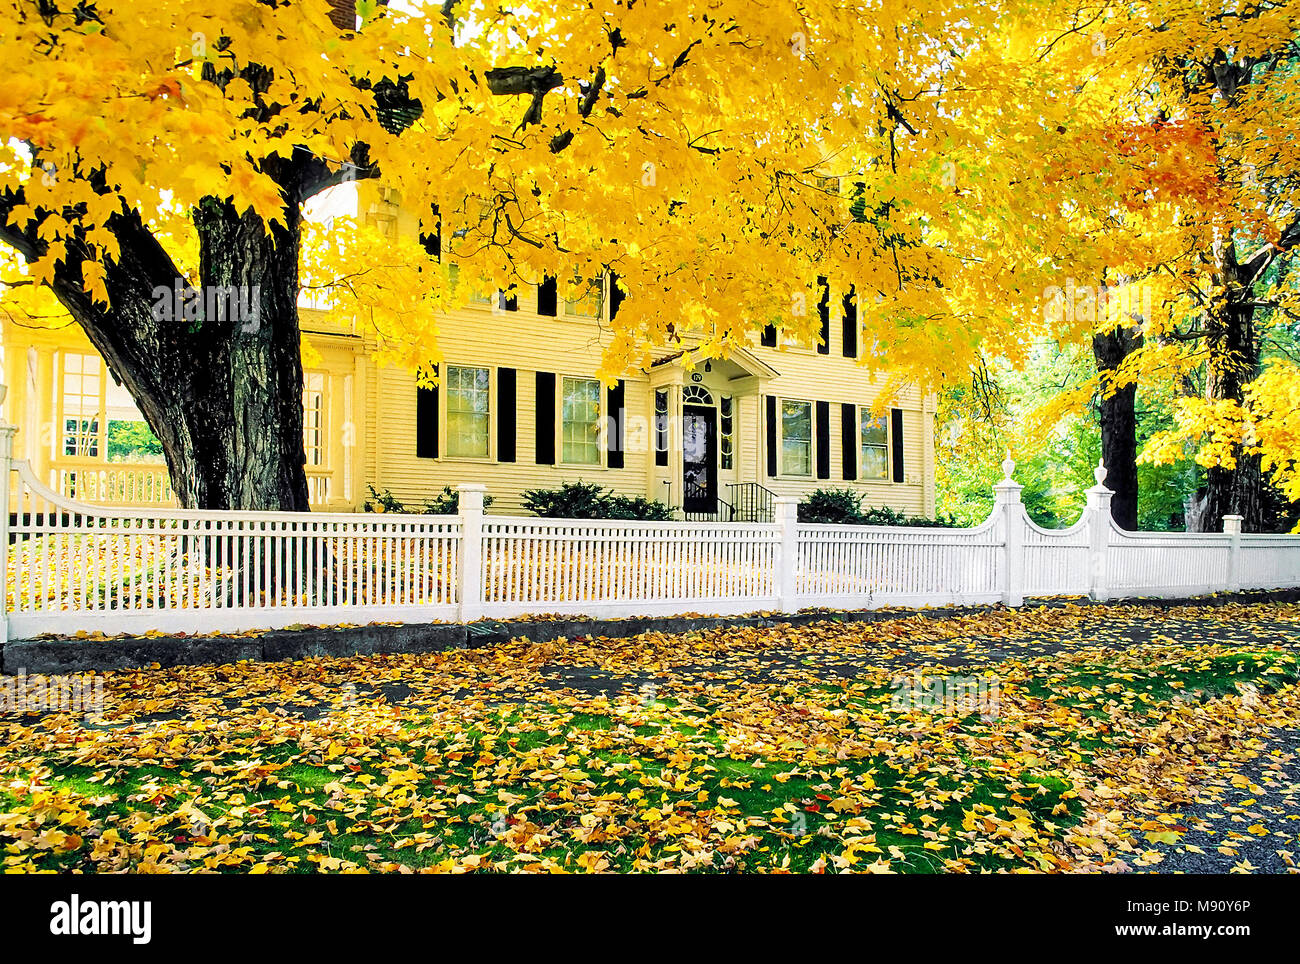 A formal white fence runs along the front yard of the Lynde Lord House in New Haven, Connecticult, United States. Stock Photo